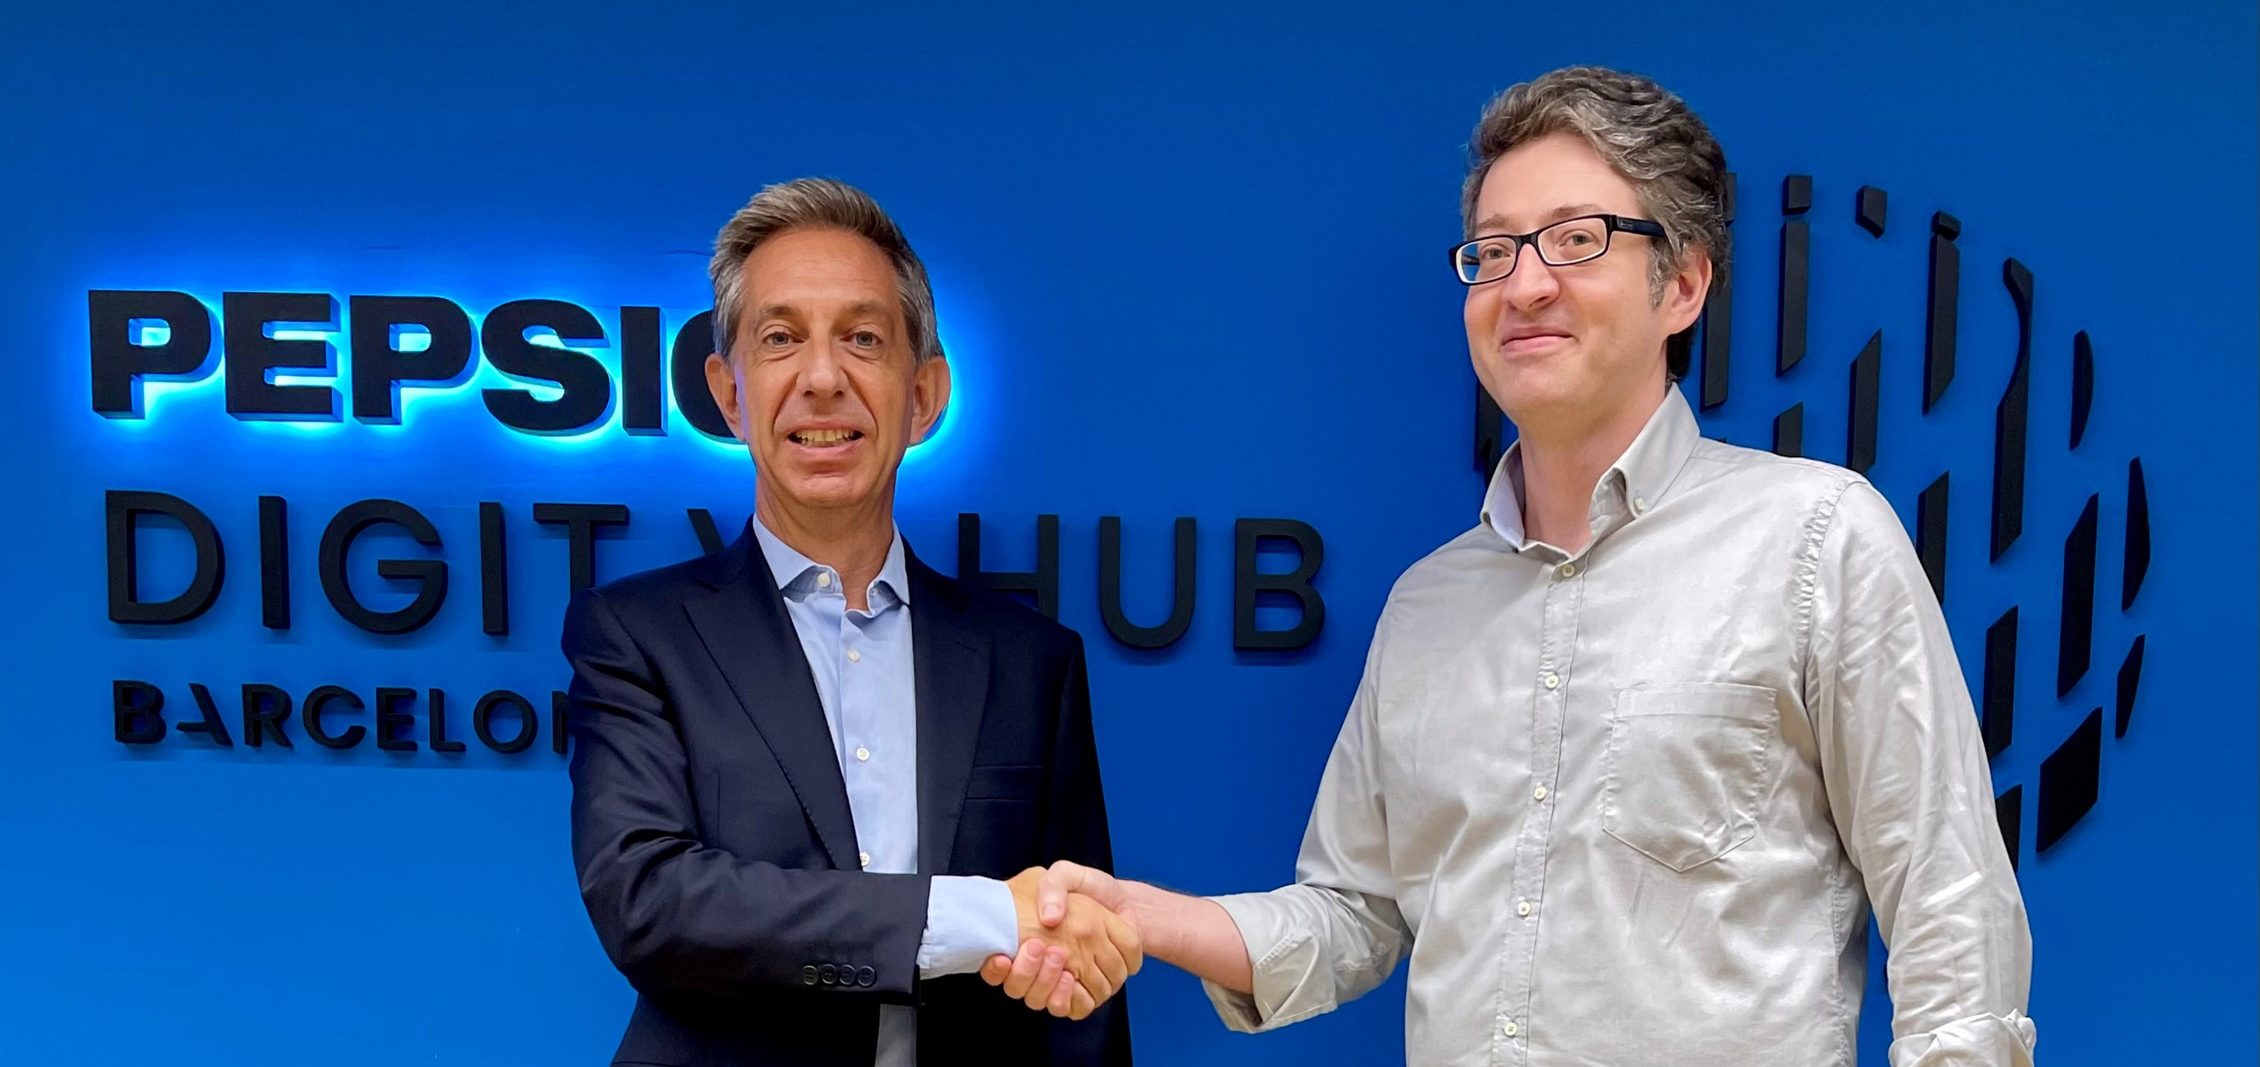 Pepsico and Mobile World Capital Barcelona join forces to promote digital talent development